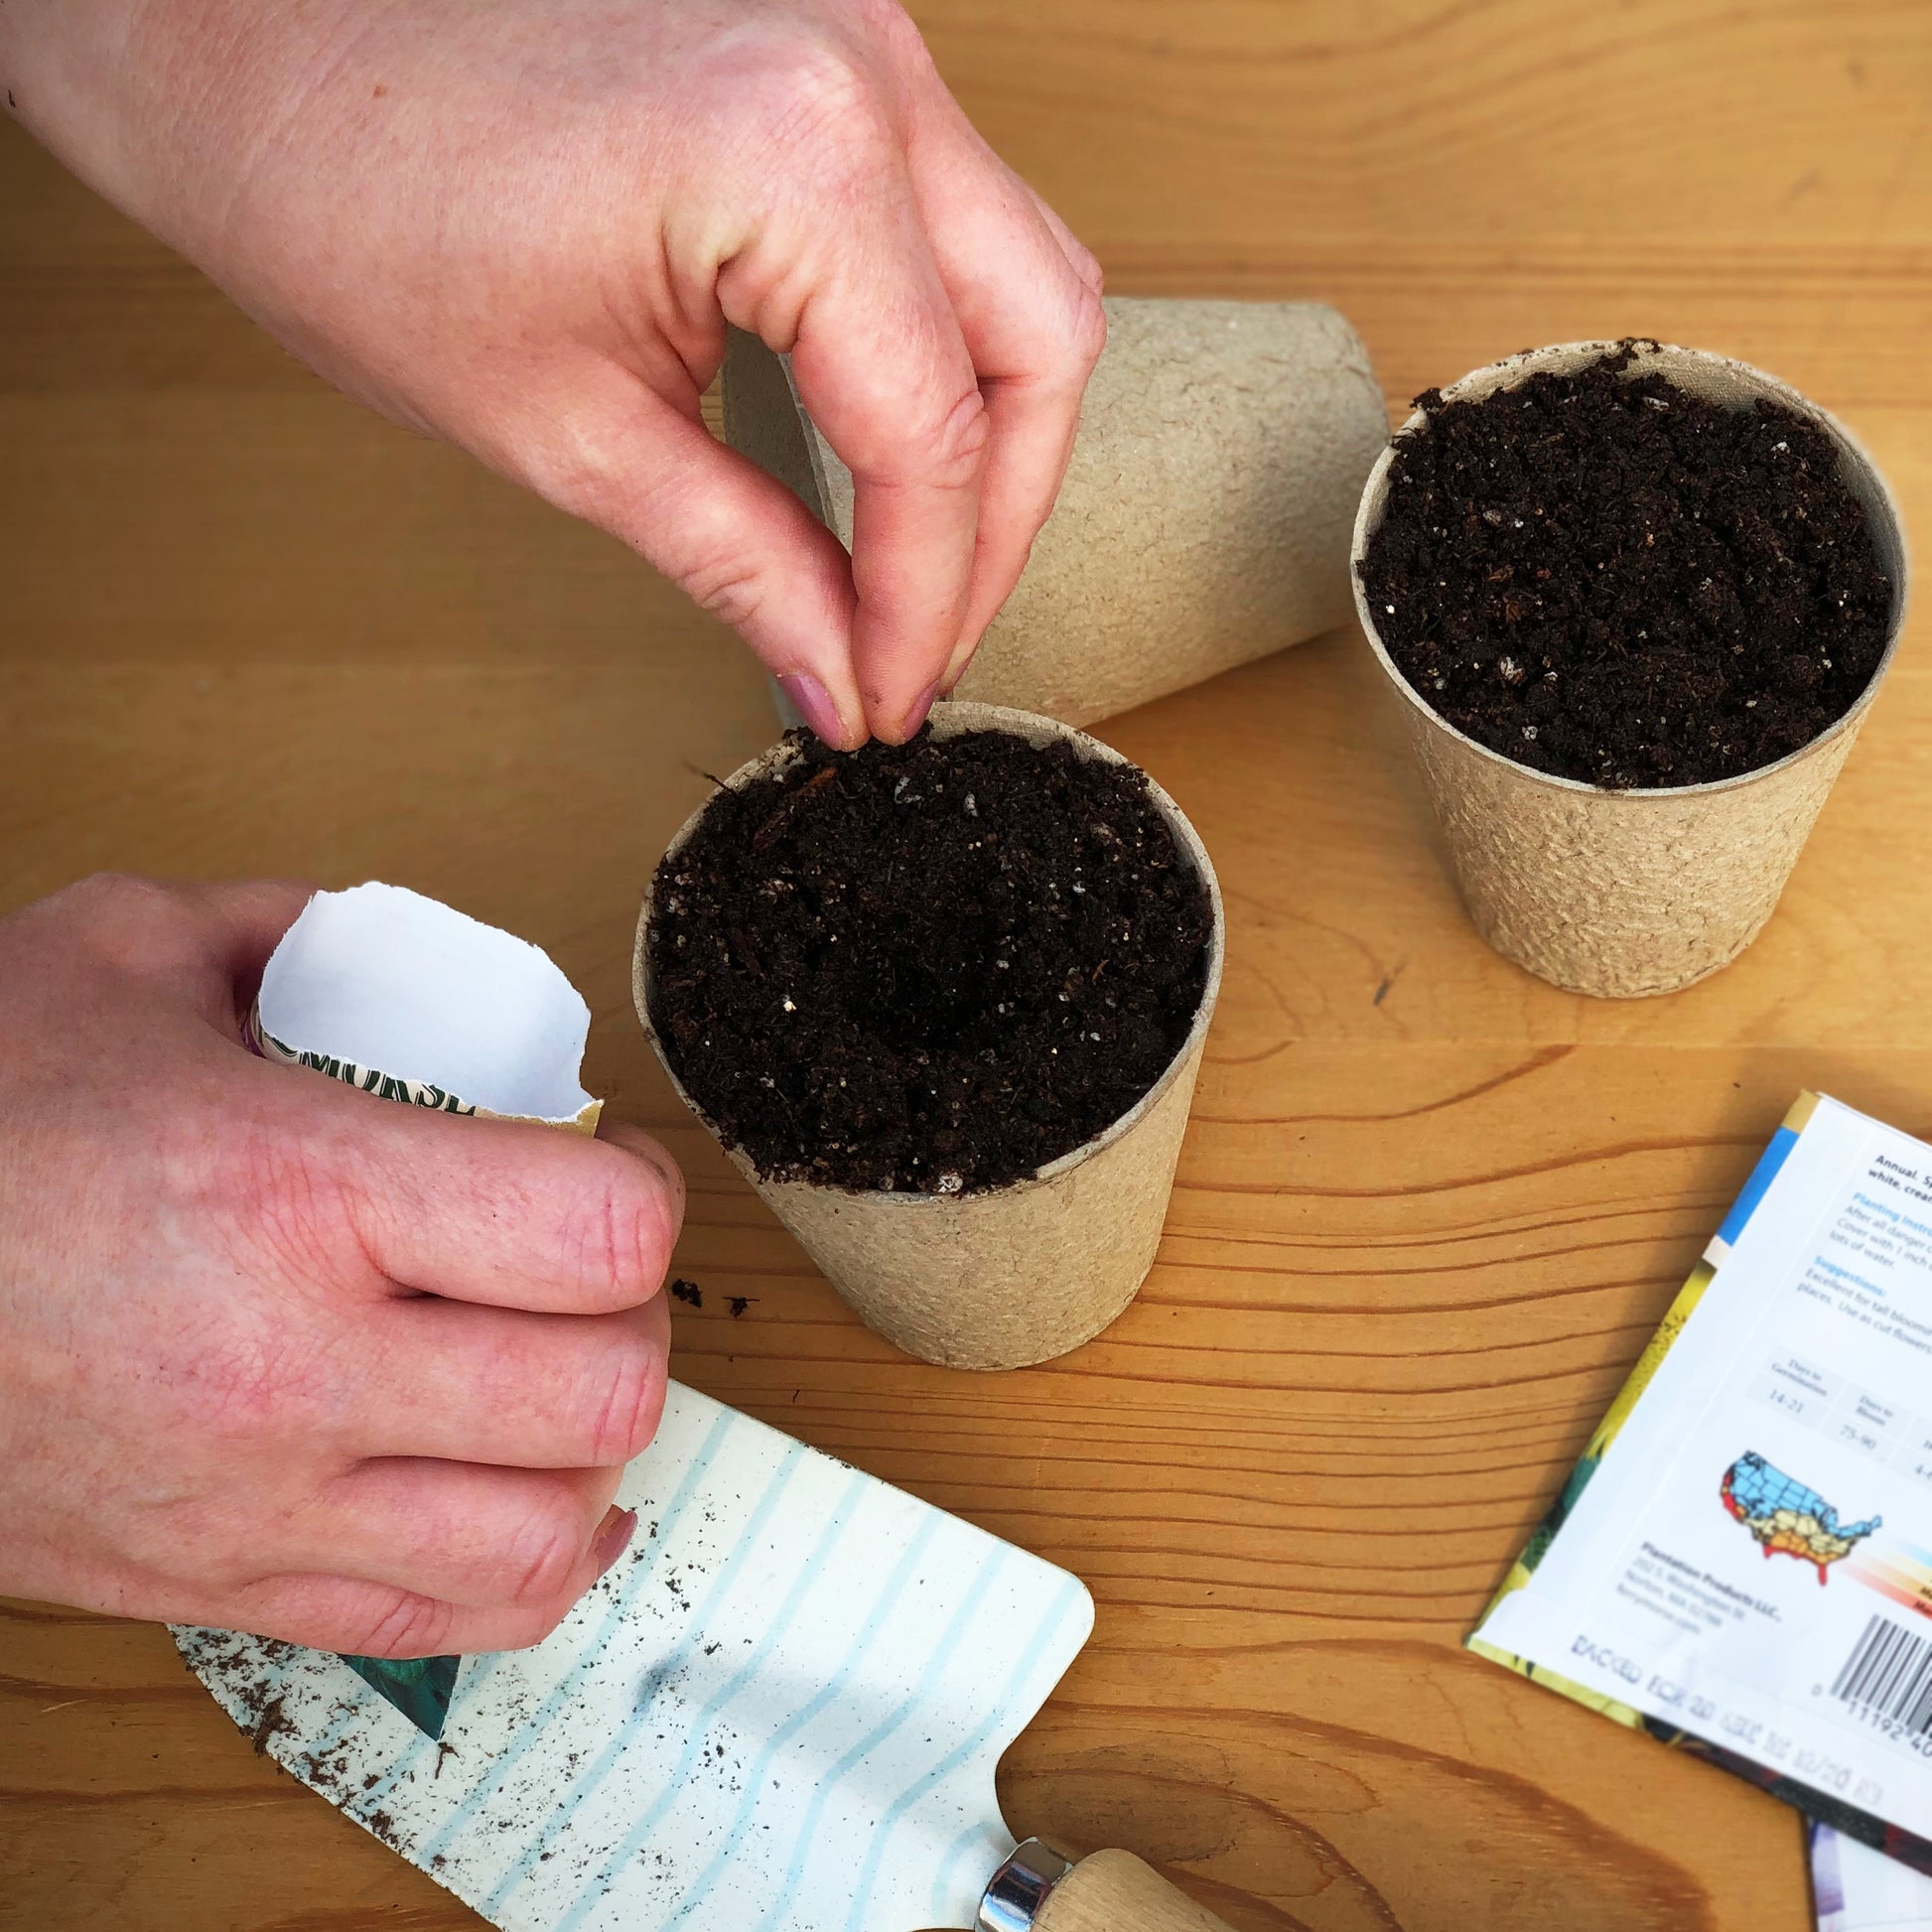 Start Scarlett O'Hara Morning Glory seeds in biodegradable paper or peat pots.